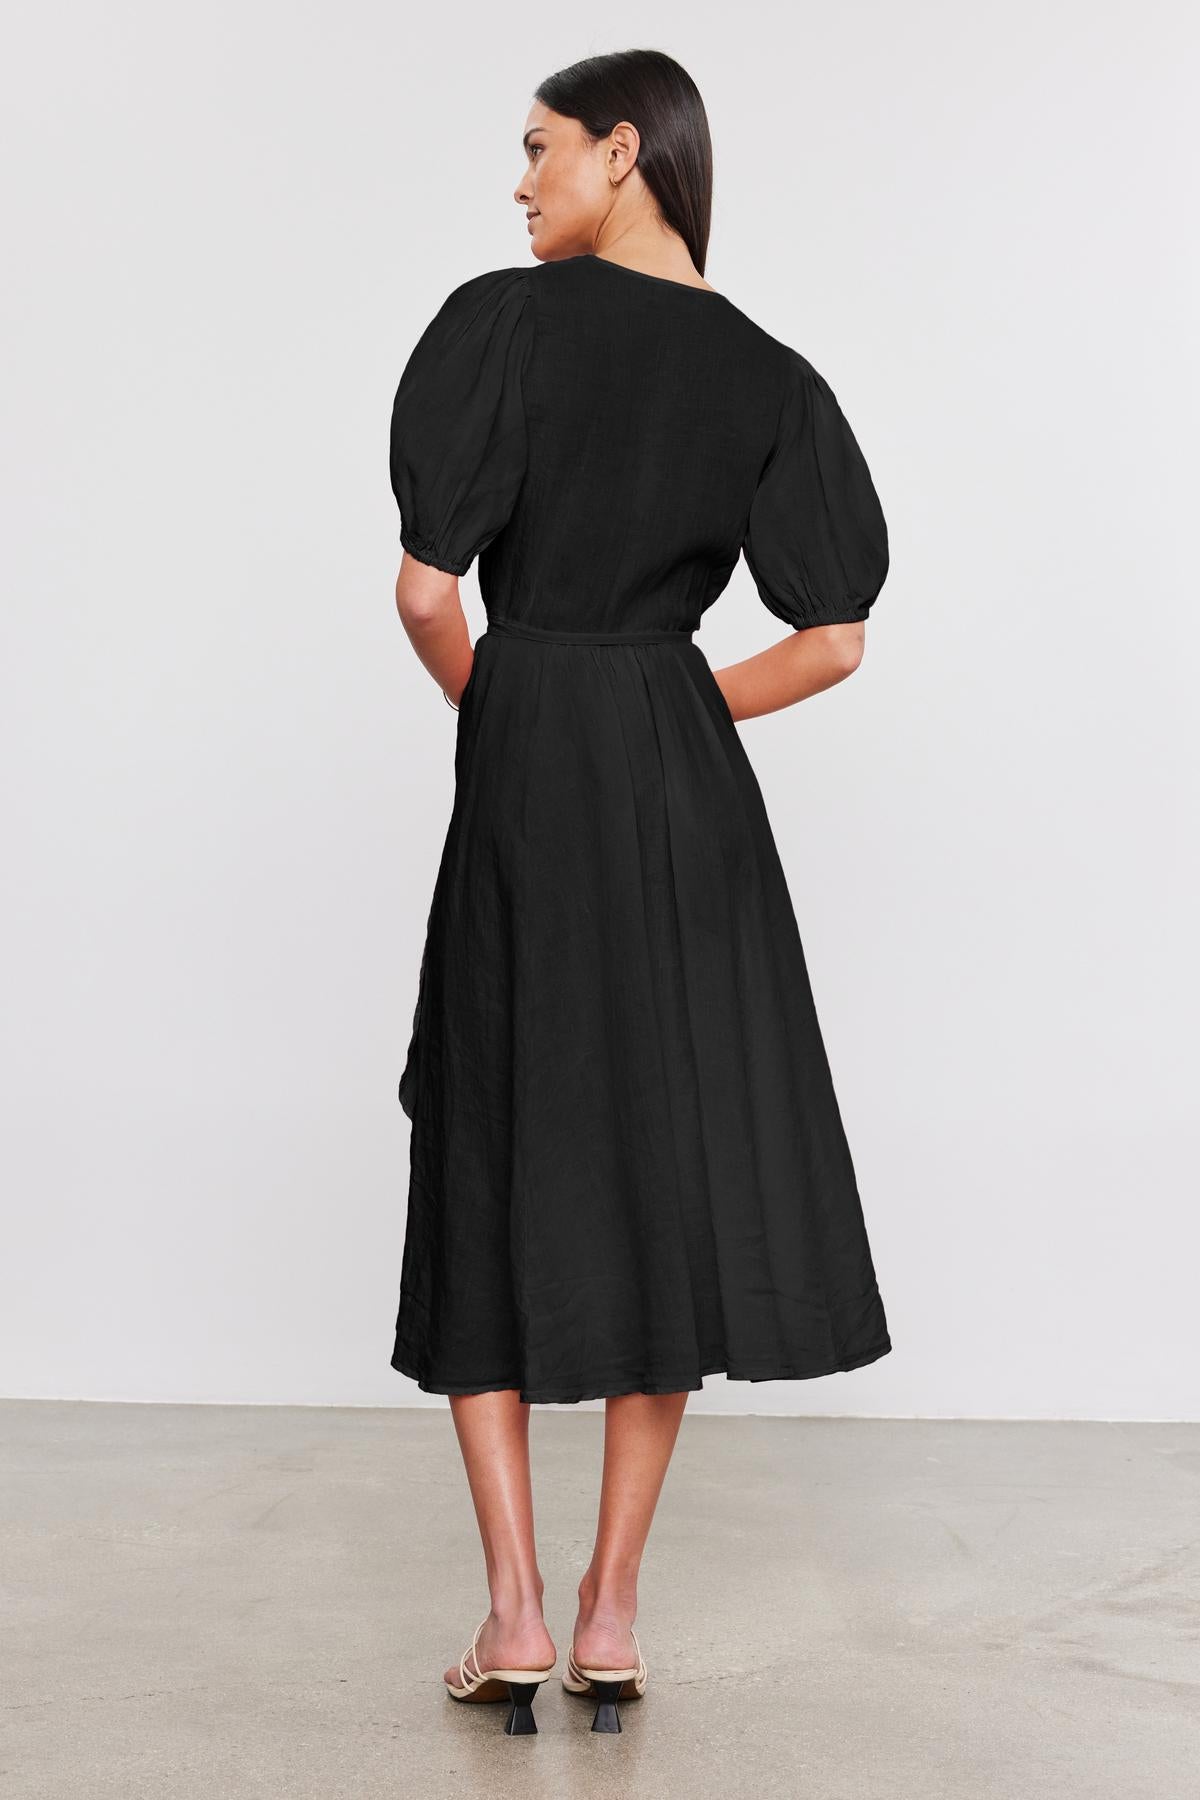 Woman in a black Velvet by Graham & Spencer Dalene Linen Dress with puffed sleeves standing, viewed from the back. She wears beige high heels and looks over her shoulder.-36917057913025